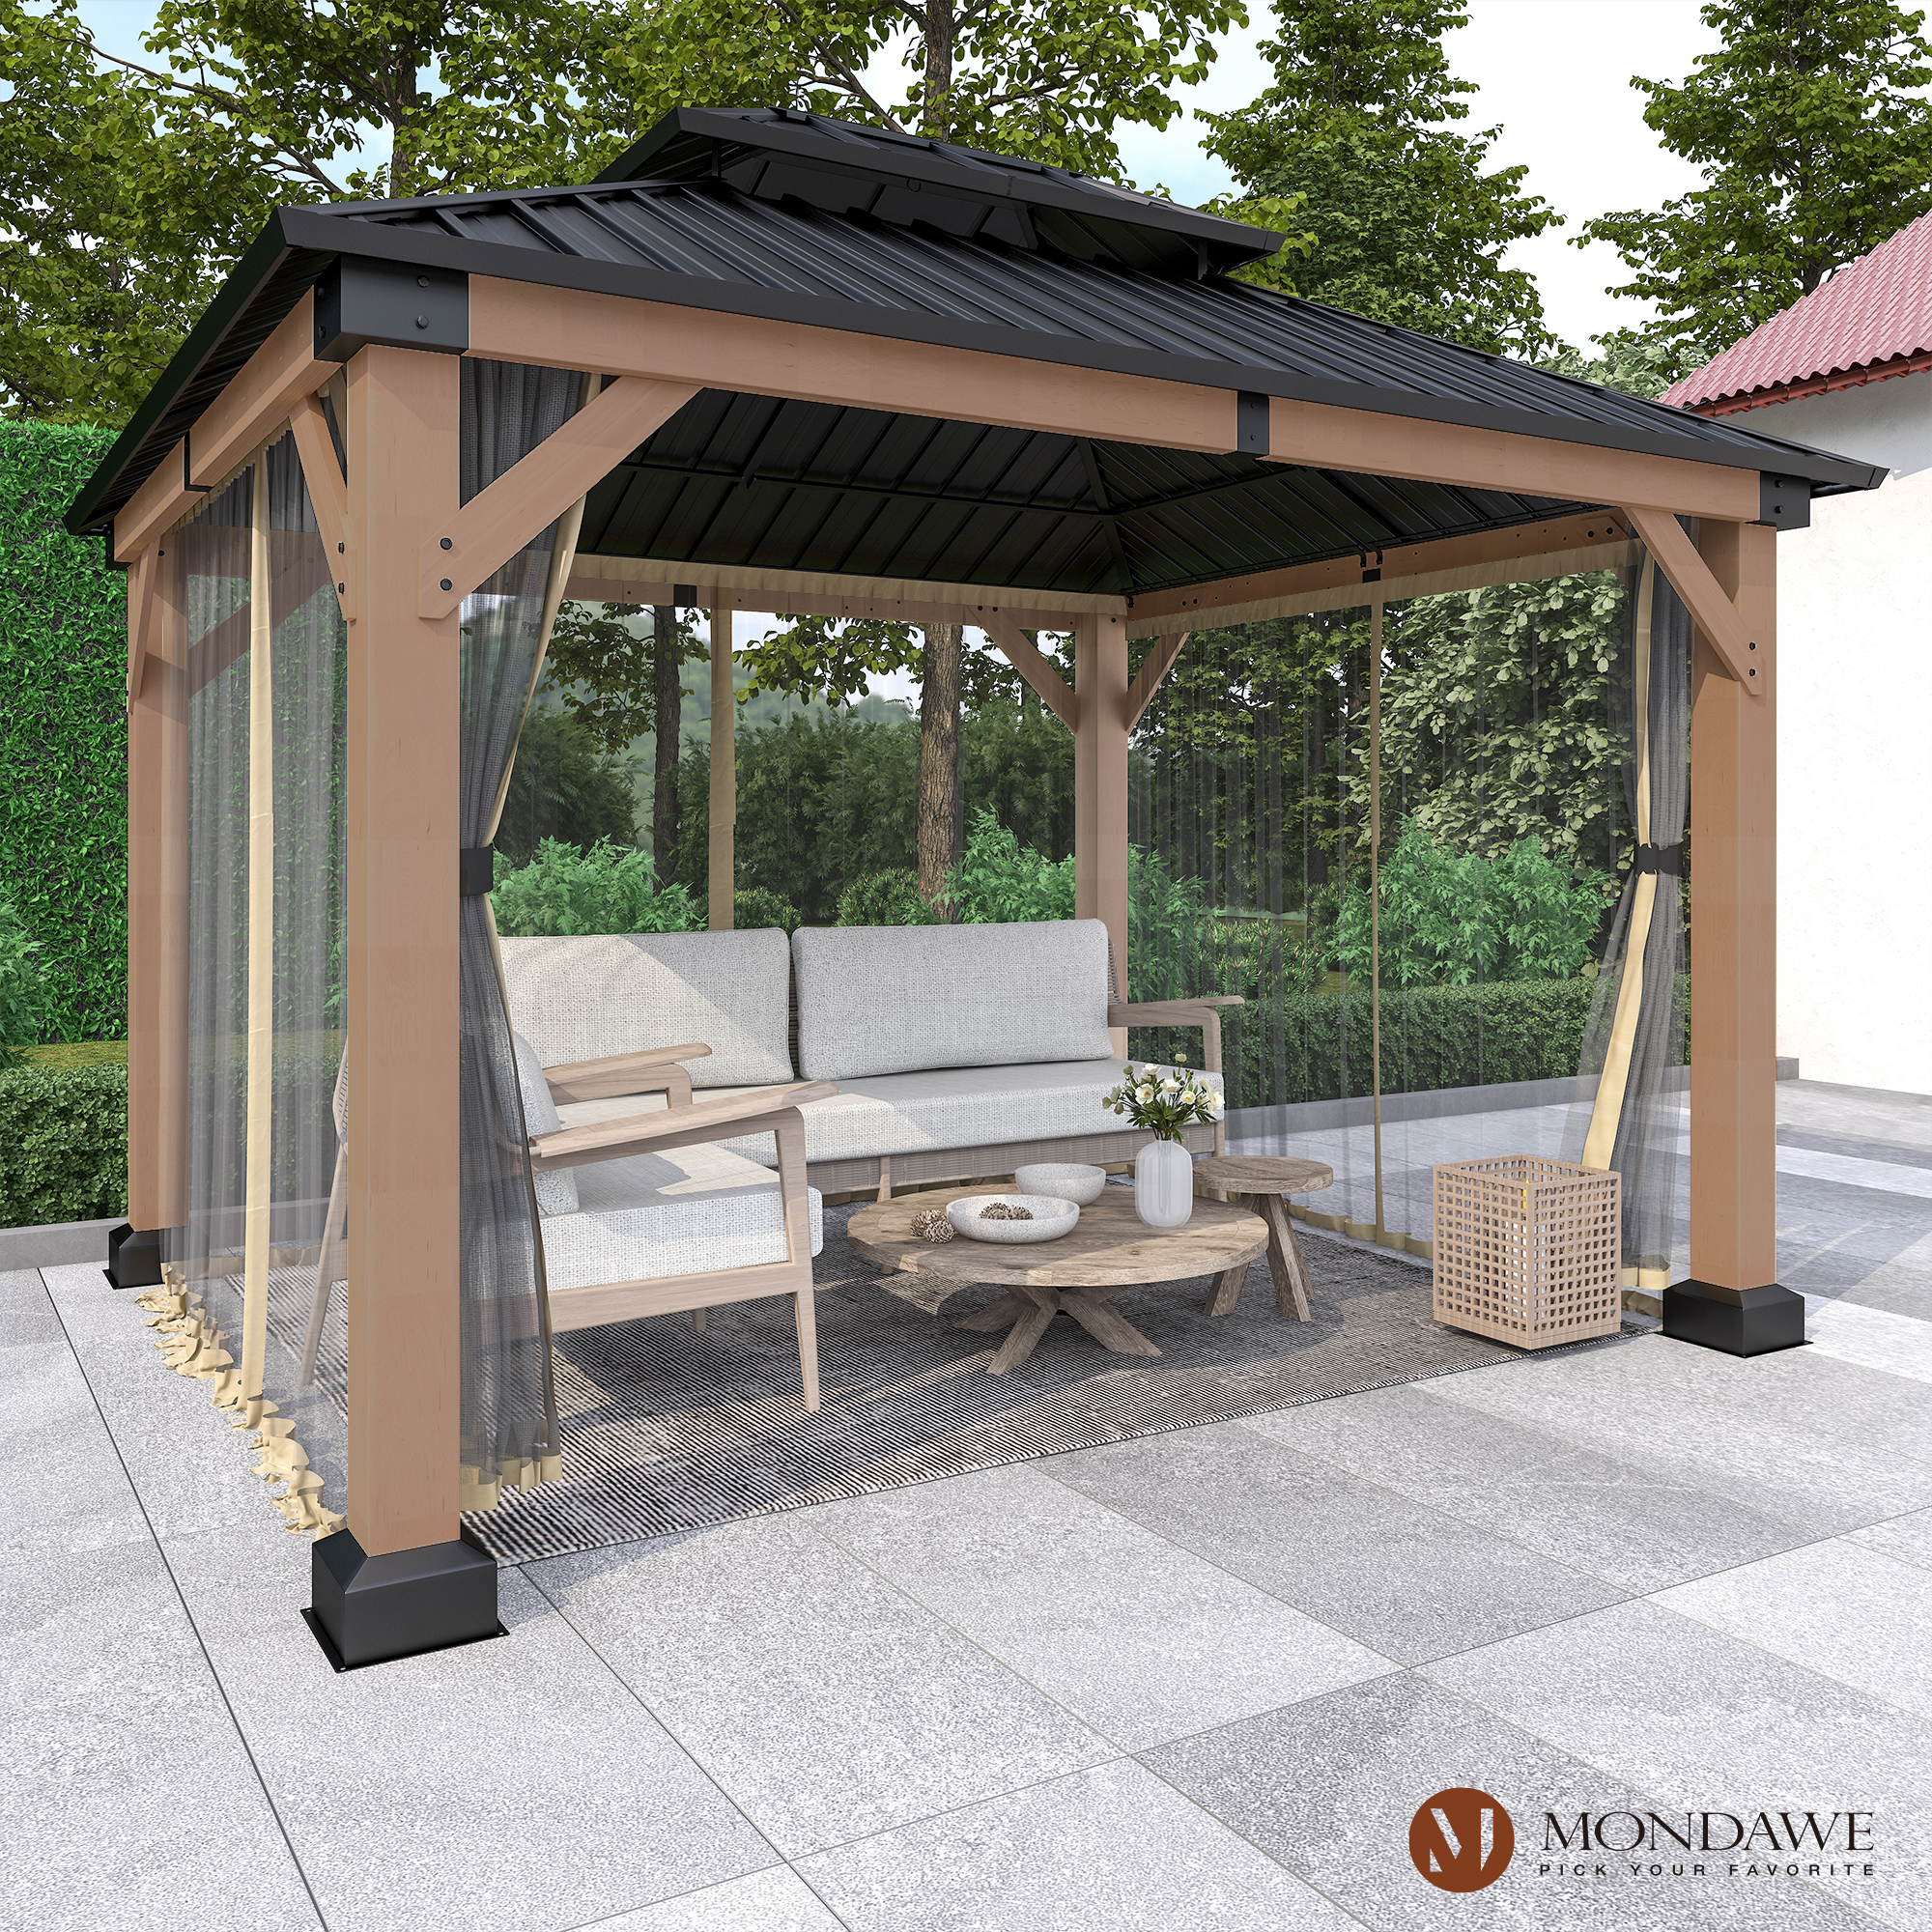 10 ft. x 12 ft. Outdoor Fir Solid Wood Frame Patio Gazebo Canopy Shelter with Galvanized Steel Hardtop Roof Pavilion-Mondawe